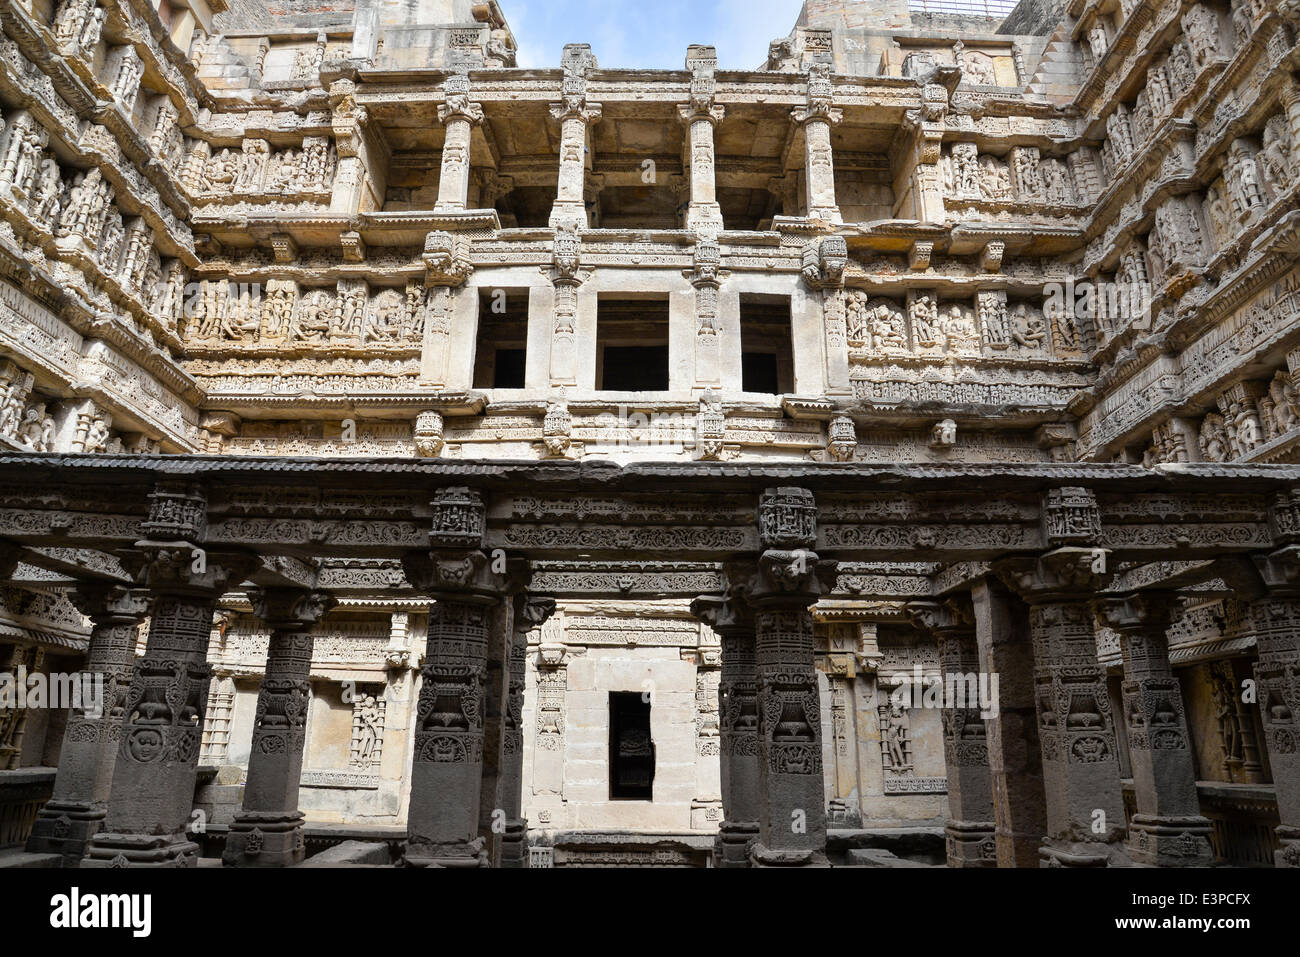 The great facade of   'Rani-ki-Vav'. Rani Ki Vav is one of the finest stepwells in India. It is  a  stepwell in Gujarat built in the 11th century in memory of King Bhimdev I of the Solanki dynasty. The stepwell was approved by UNESCO as  World Heritage Site for its exceptional example of technological development   in utilizing ground water resources. (Photo by Nisarg Lakhamani/Pacific Press) Stock Photo